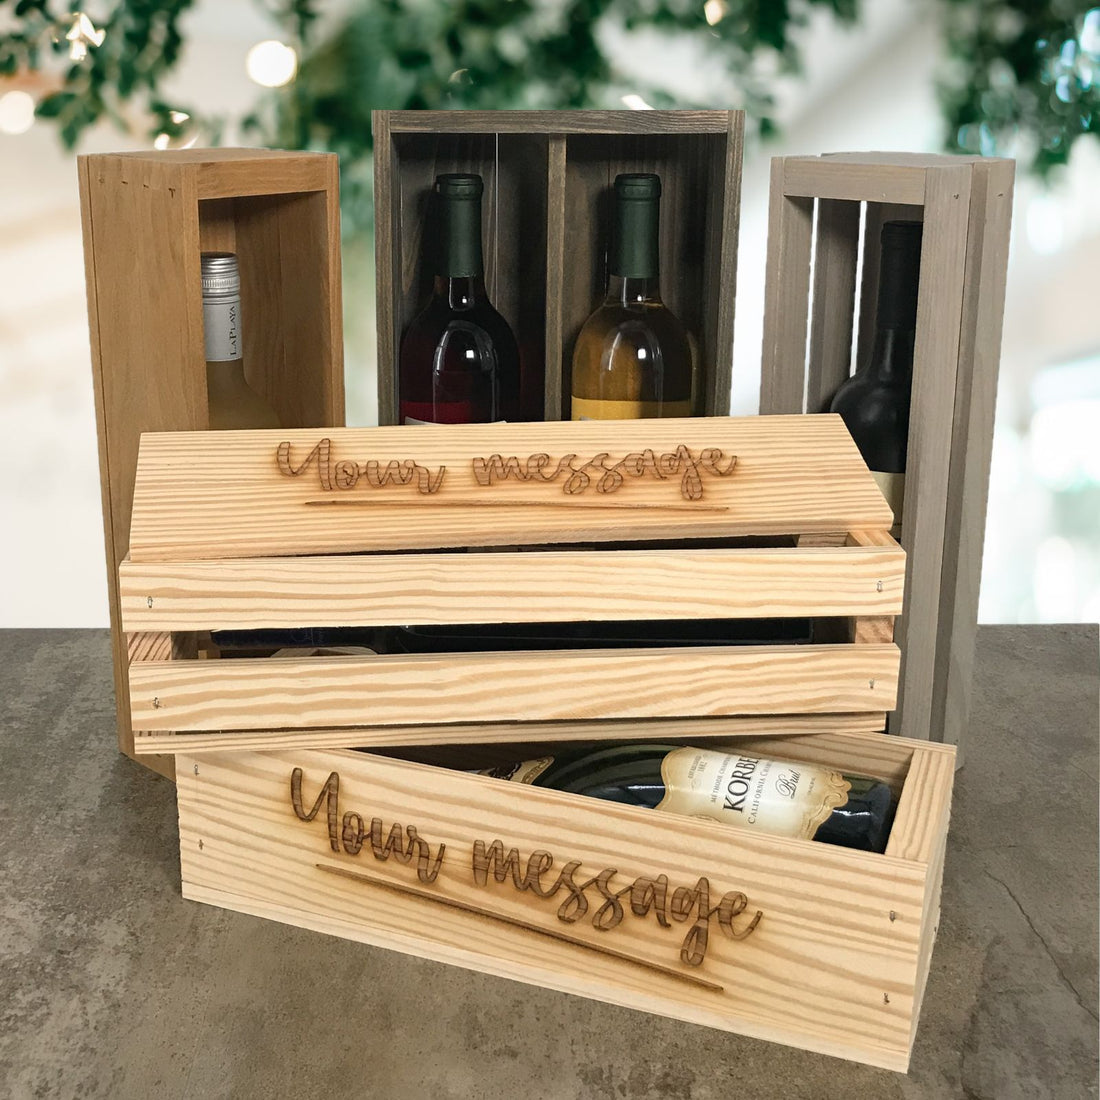 Using personalized wine crates for distinctive packaging